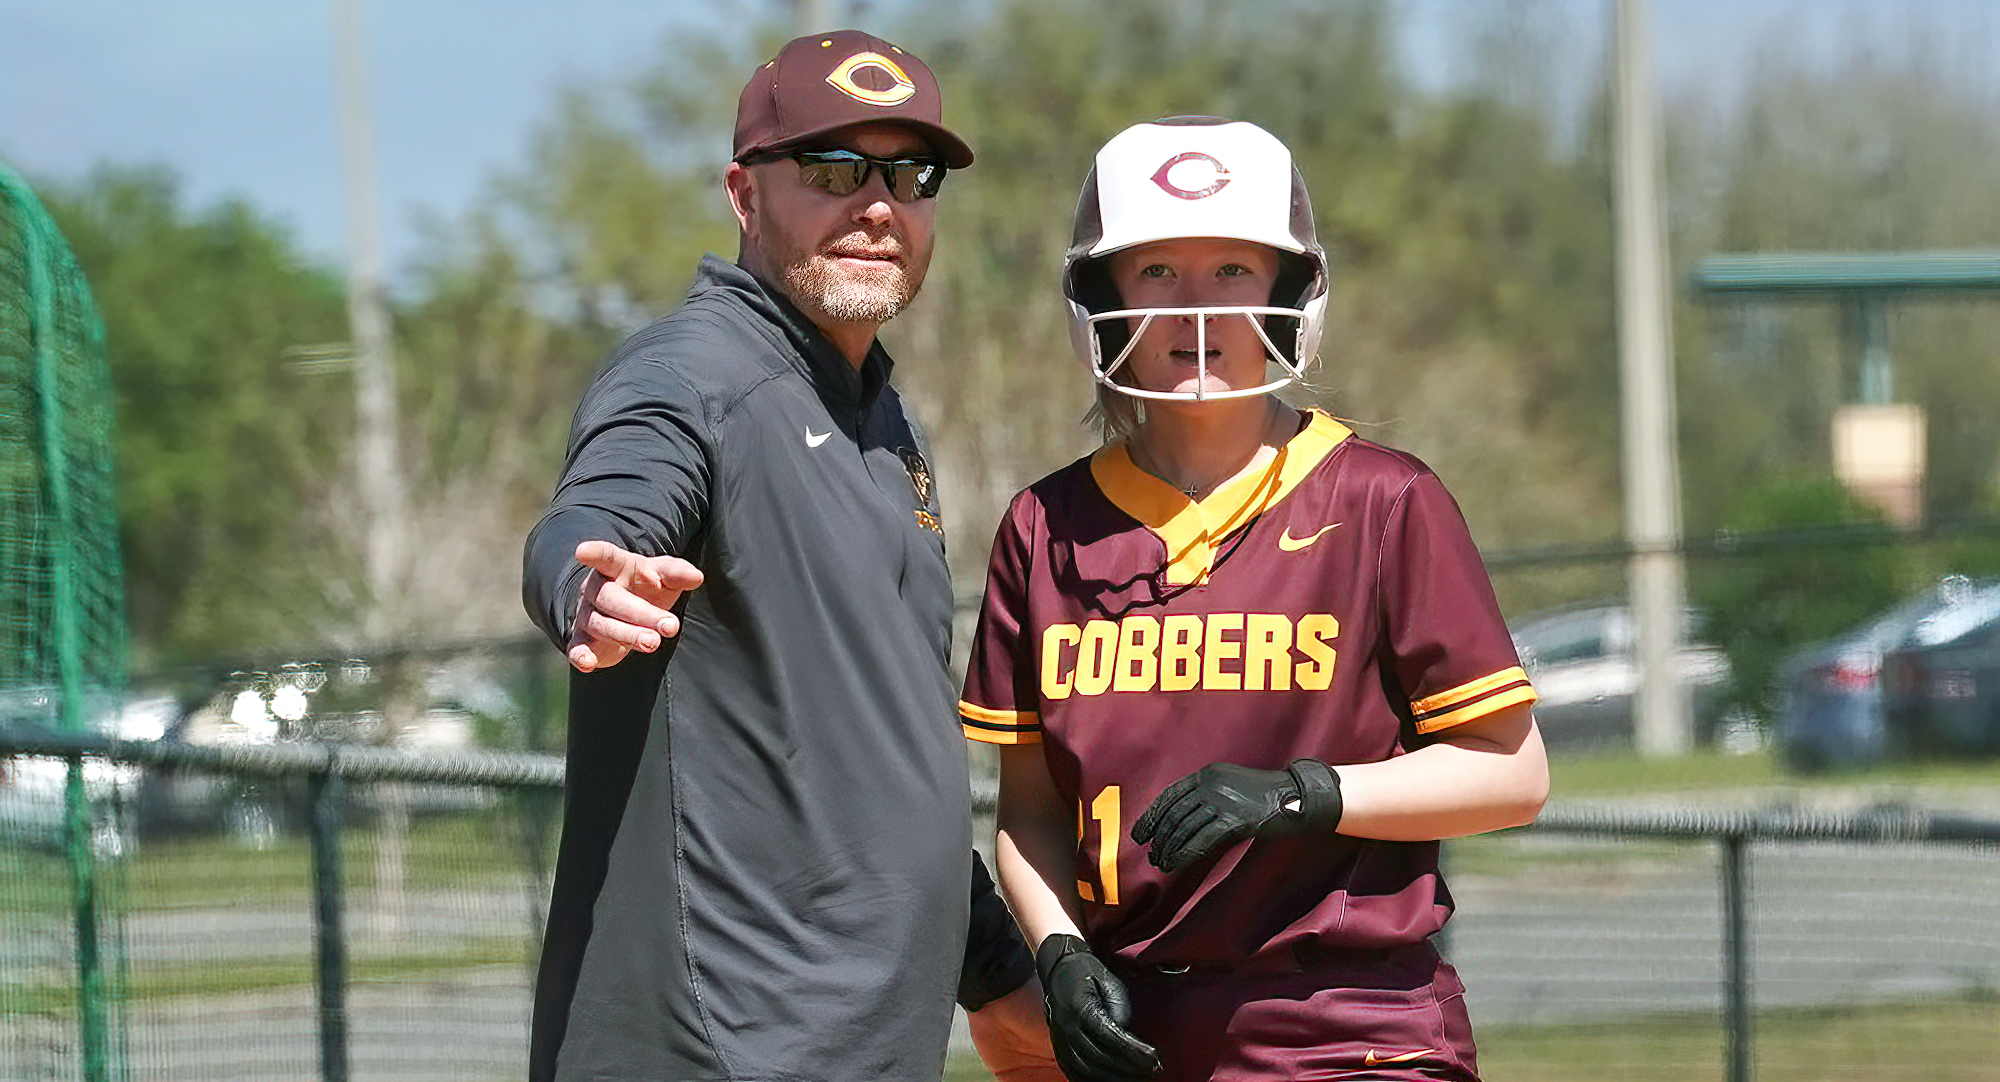 Head Coach Chad Slyter talks to freshman Lexi Burke during the Cobbers' 6-0 win over Regis. (Pic courtesy of courtesy of Jim/Jill Kolstad)